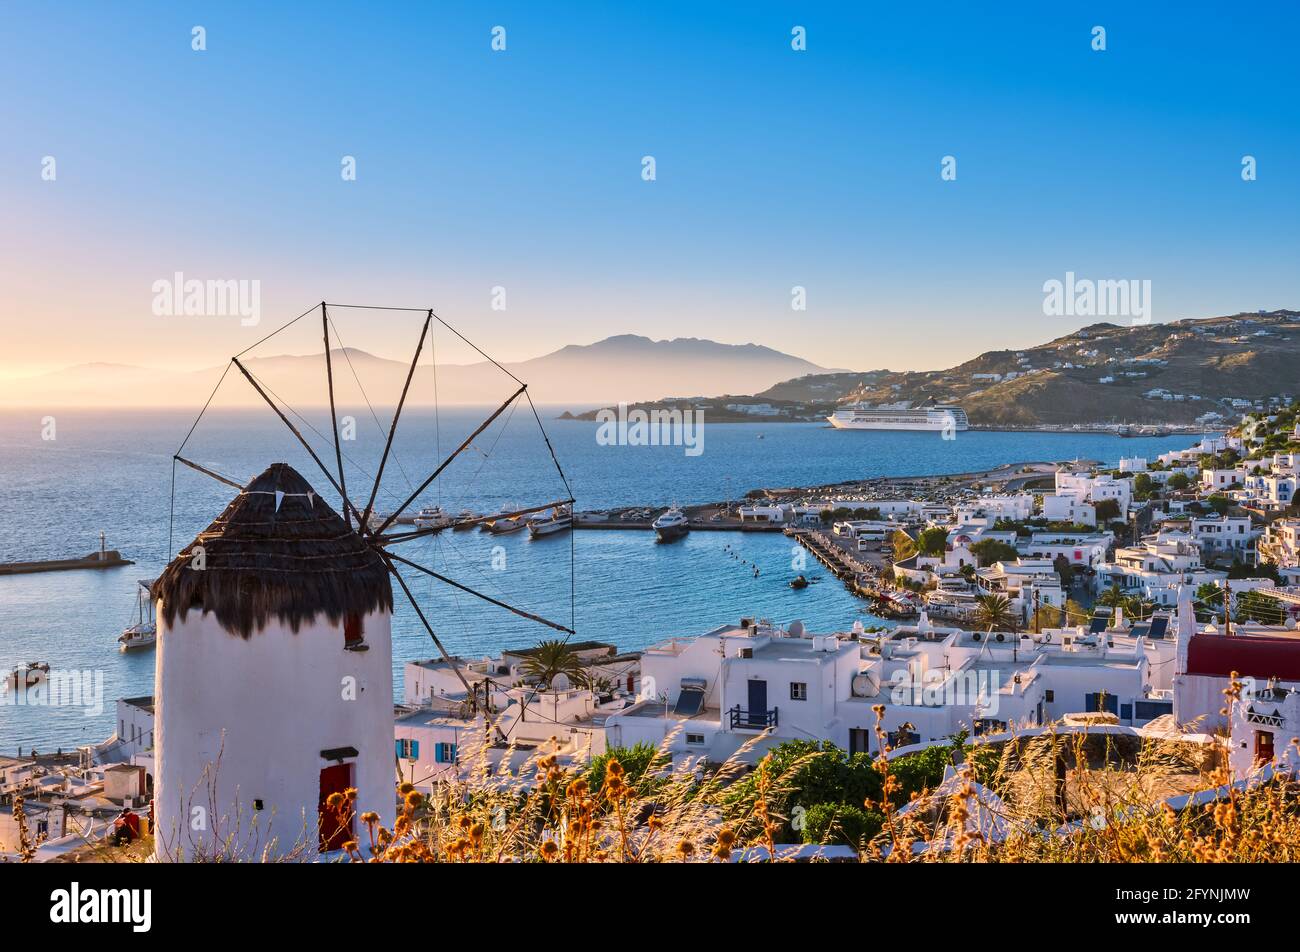 Beautiful view of Greek white windmill overlooking Mykonos, Greece at sunset. Bay, boats, cruise liner, whitewashed houses, islands, hazy background. Stock Photo